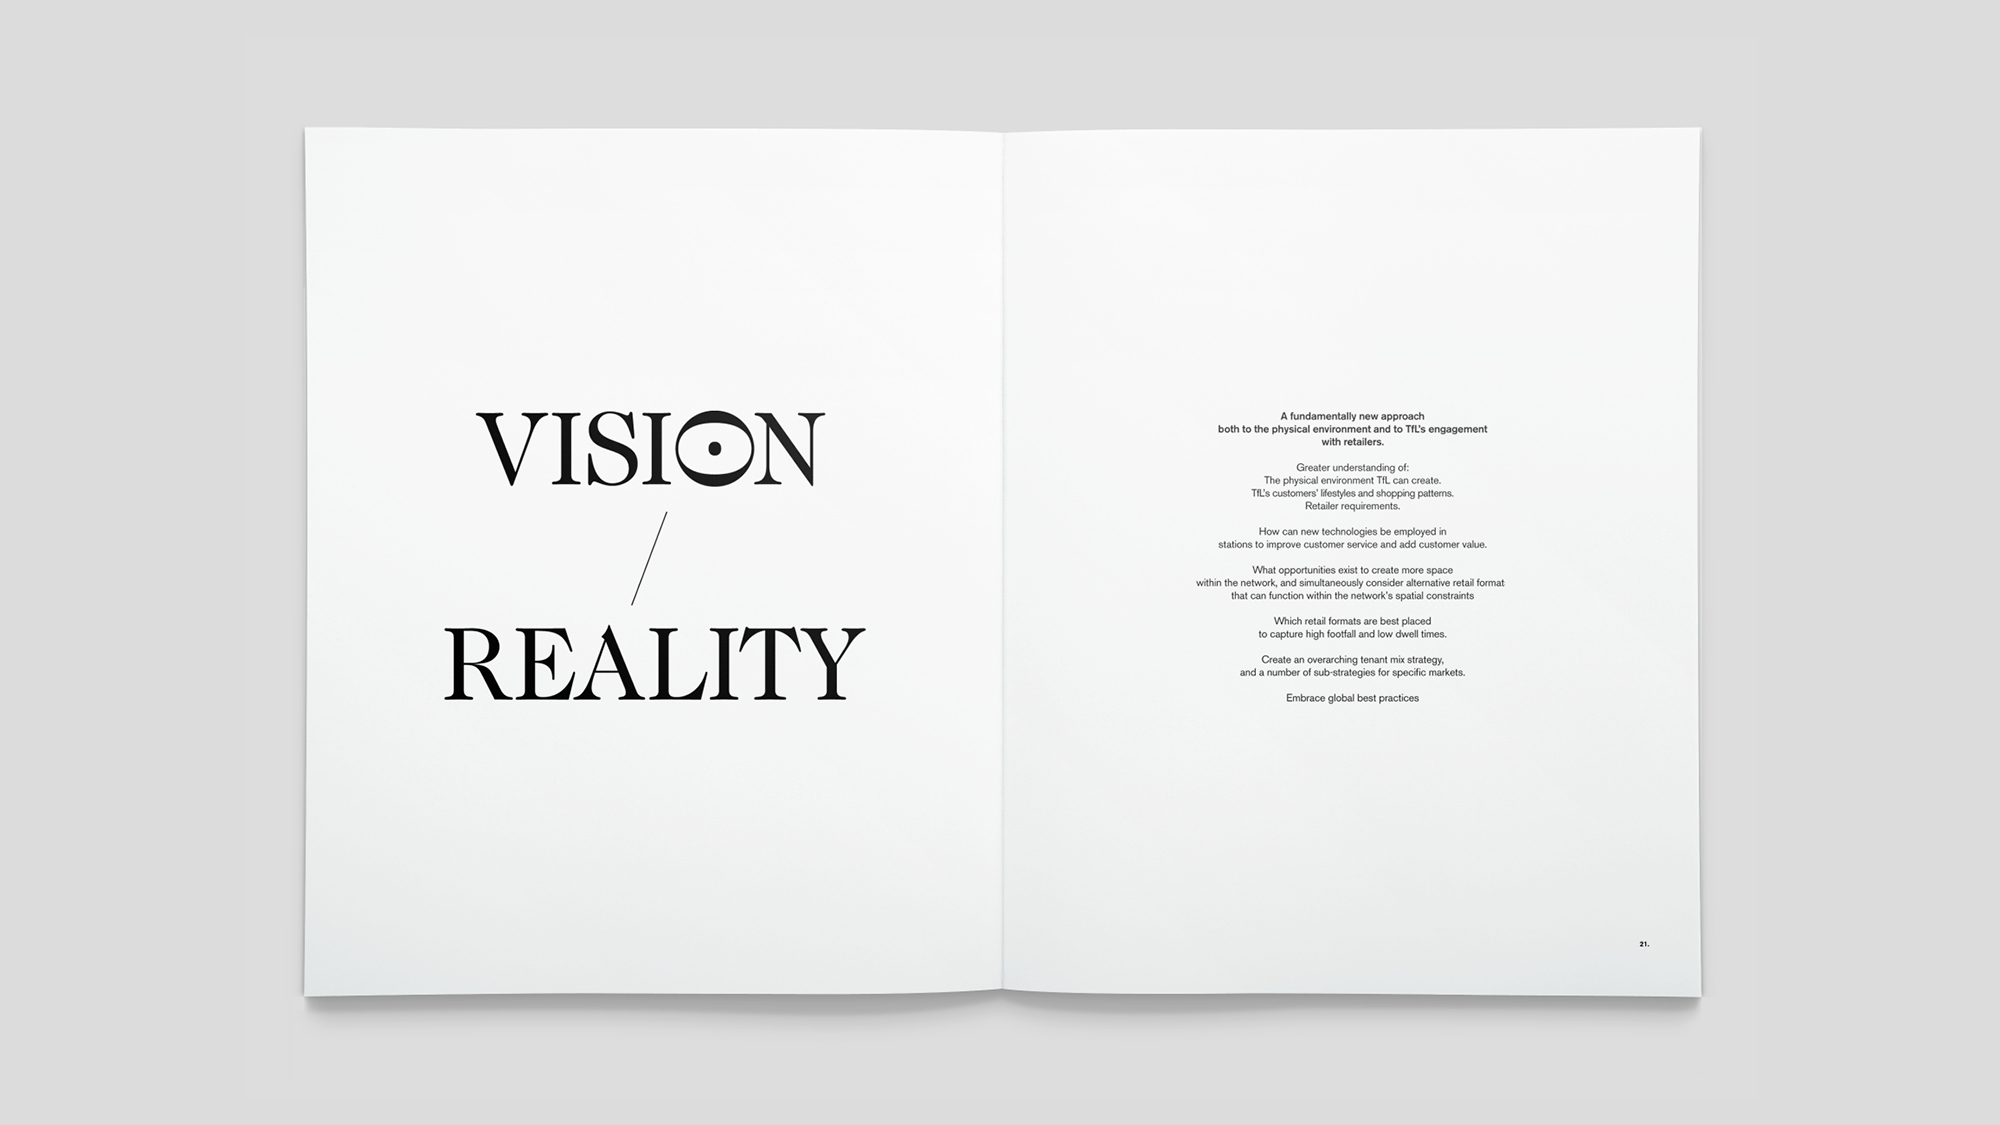 Entity-3-Three-Brand-Design-Agency-Sydney-Transport-for-London-Vision-9-experience-print-book-spread-type